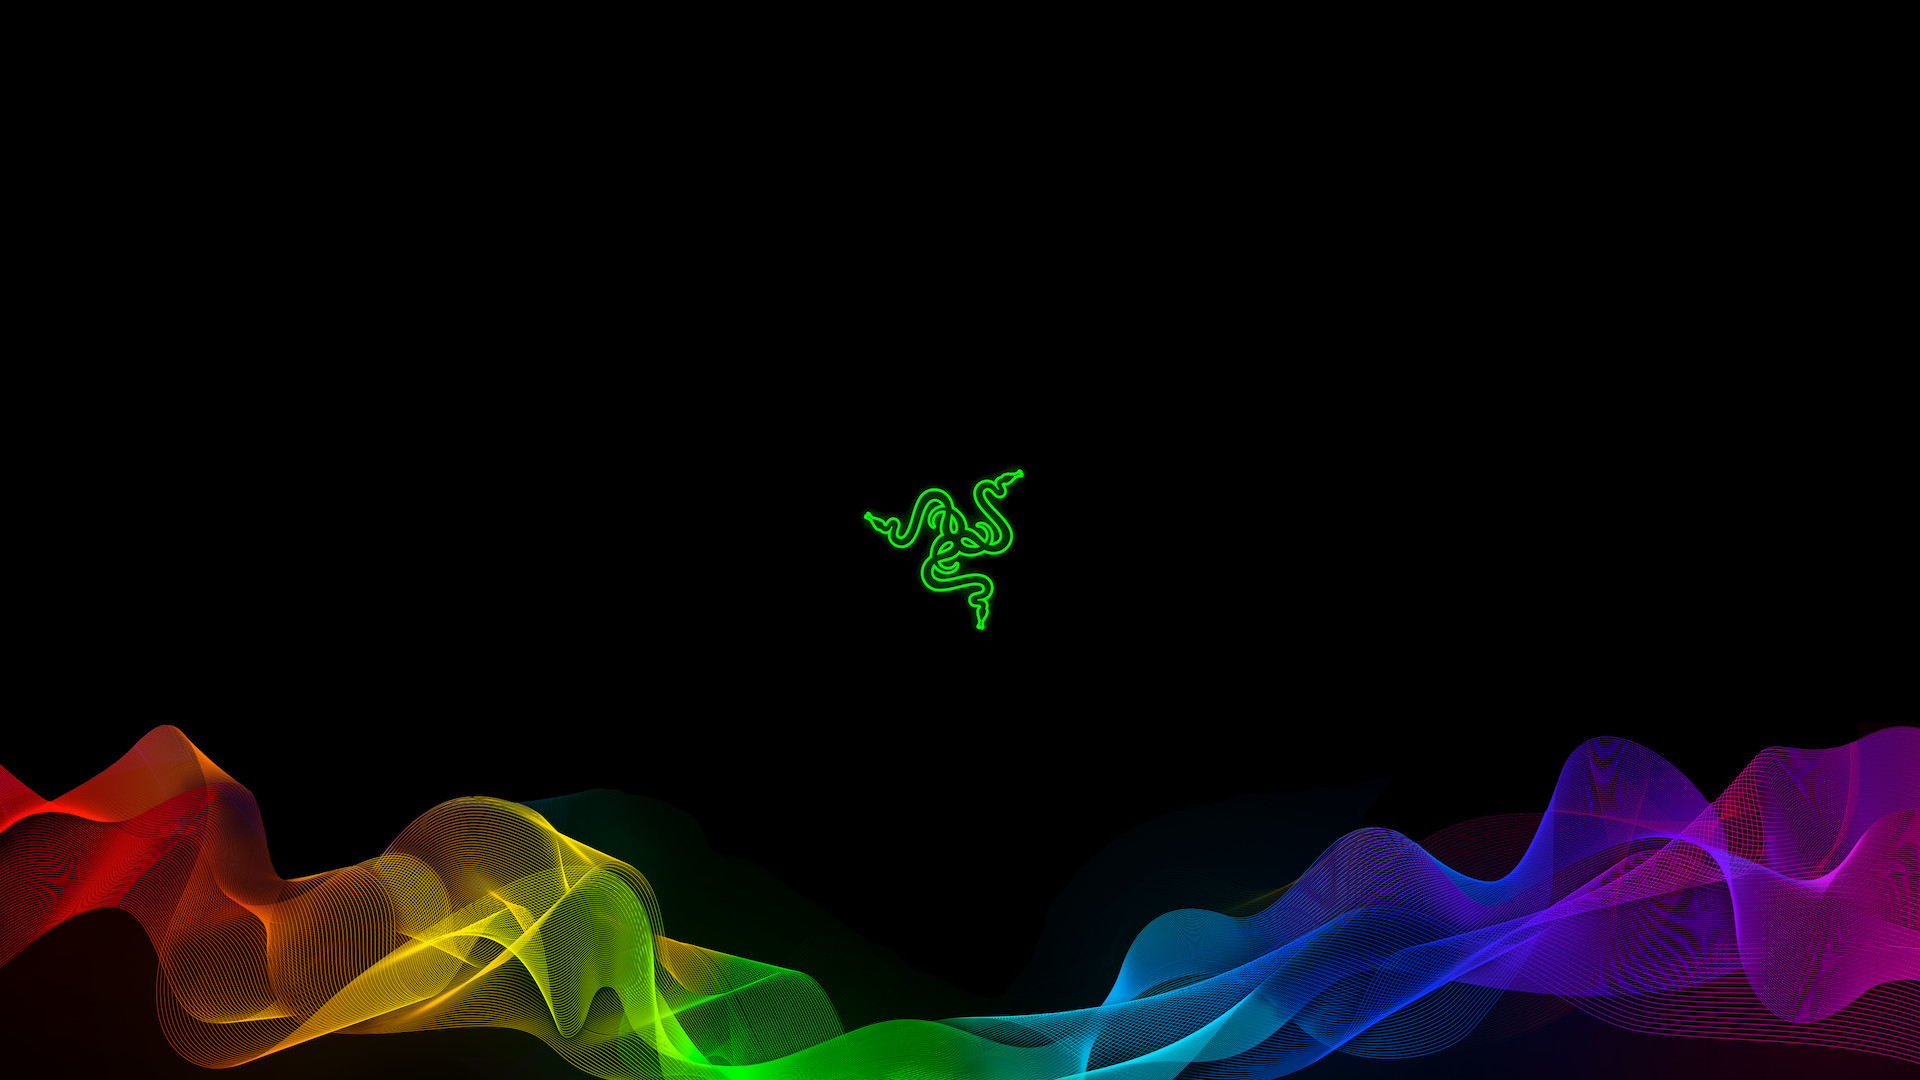 I Think It Was Based On The Design Of The Valerie Wallpaper, - Razer Wallpaper 4k - HD Wallpaper 